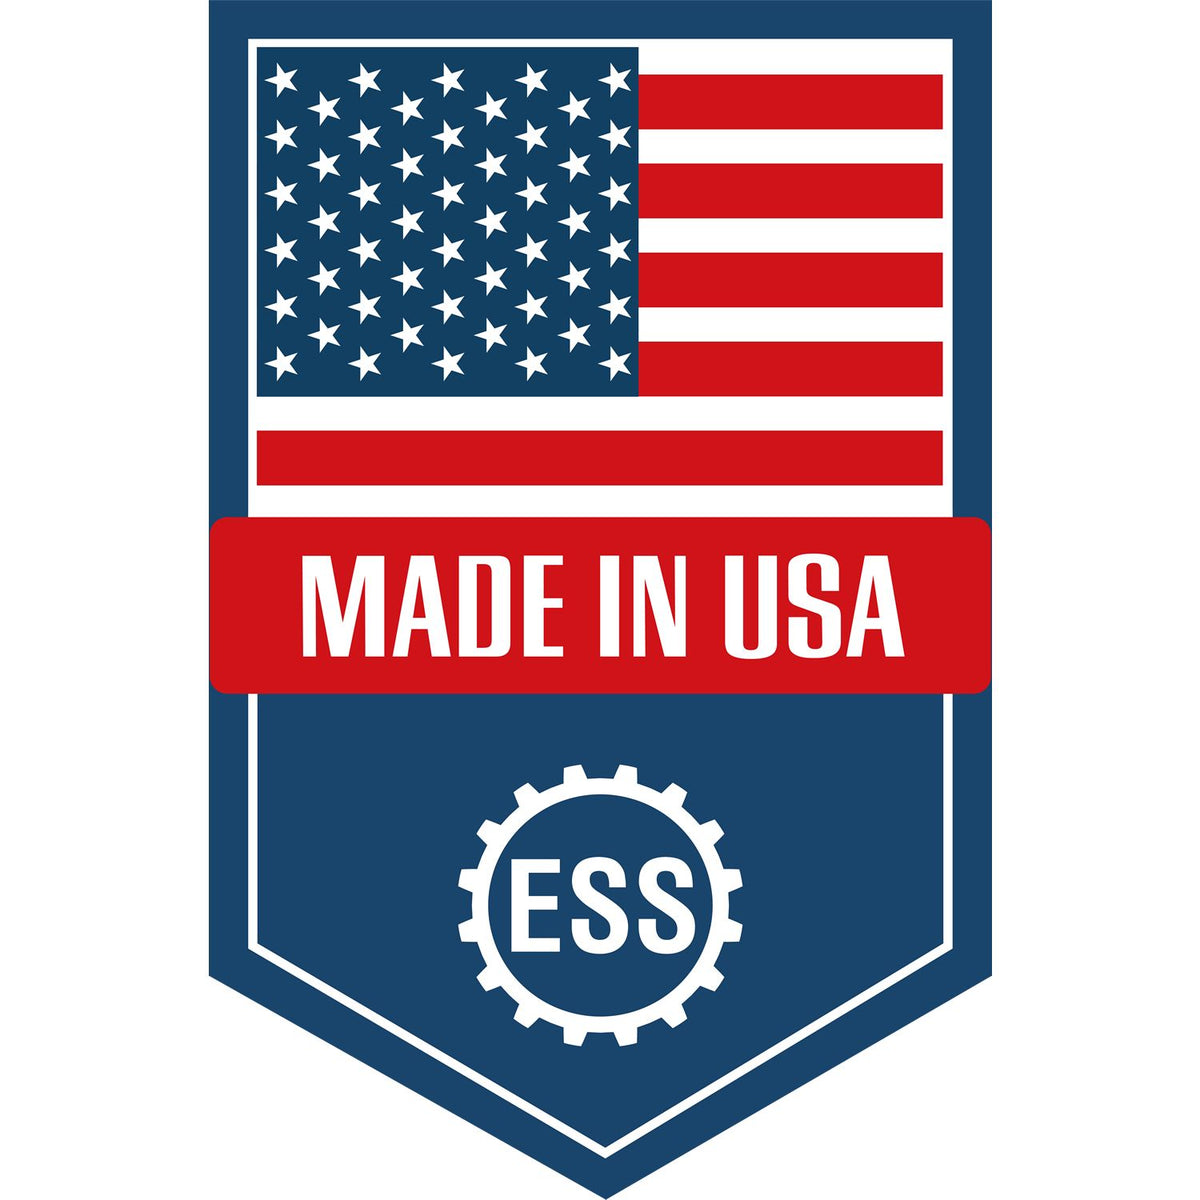 An icon or graphic with an american flag and text reading Made in USA for the North Dakota Professional Engineer Seal Stamp